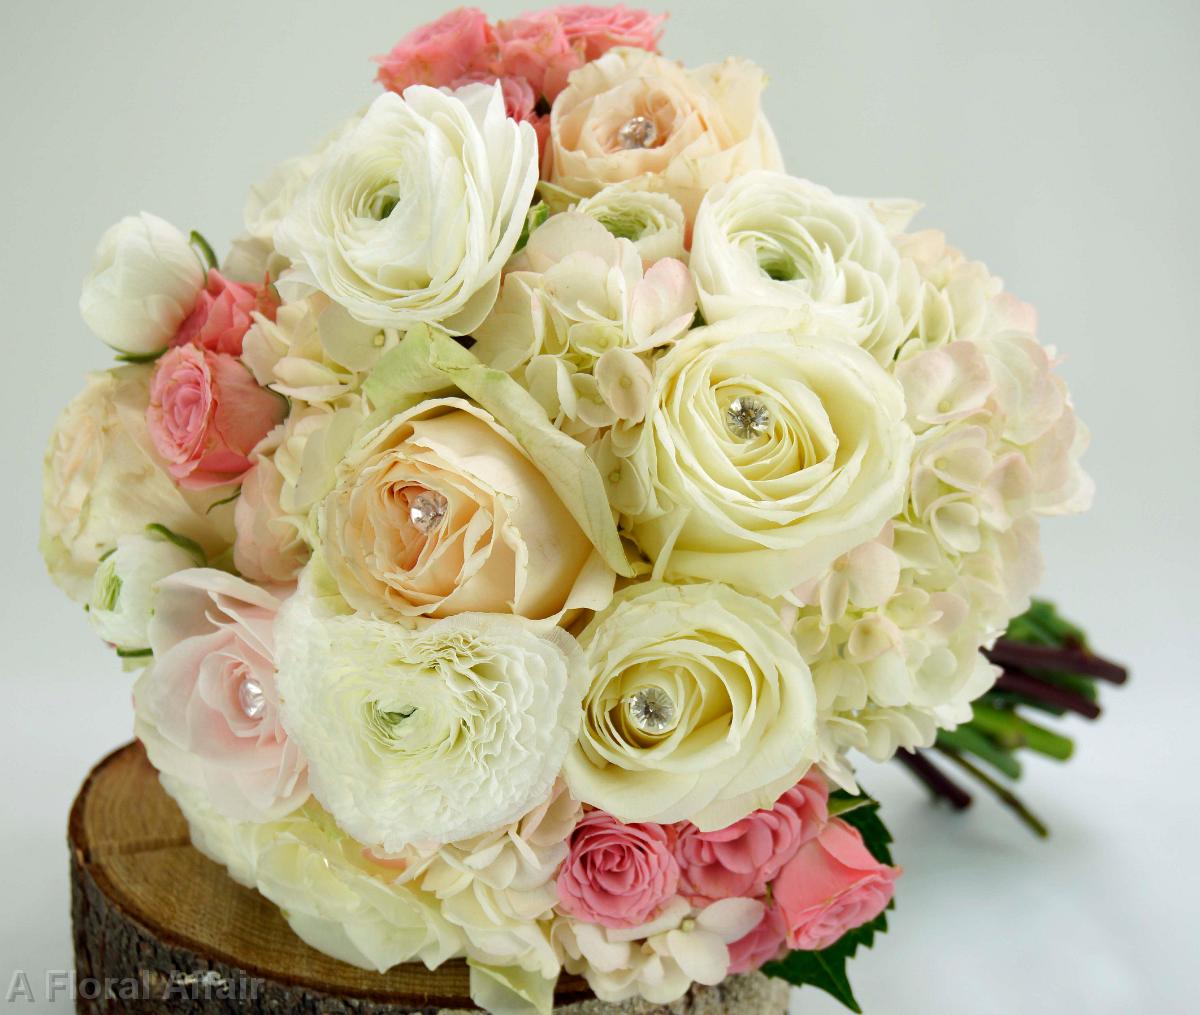 BB1053-Romantic Brides Bouquet of Soft shades of Petal Pink and Whites